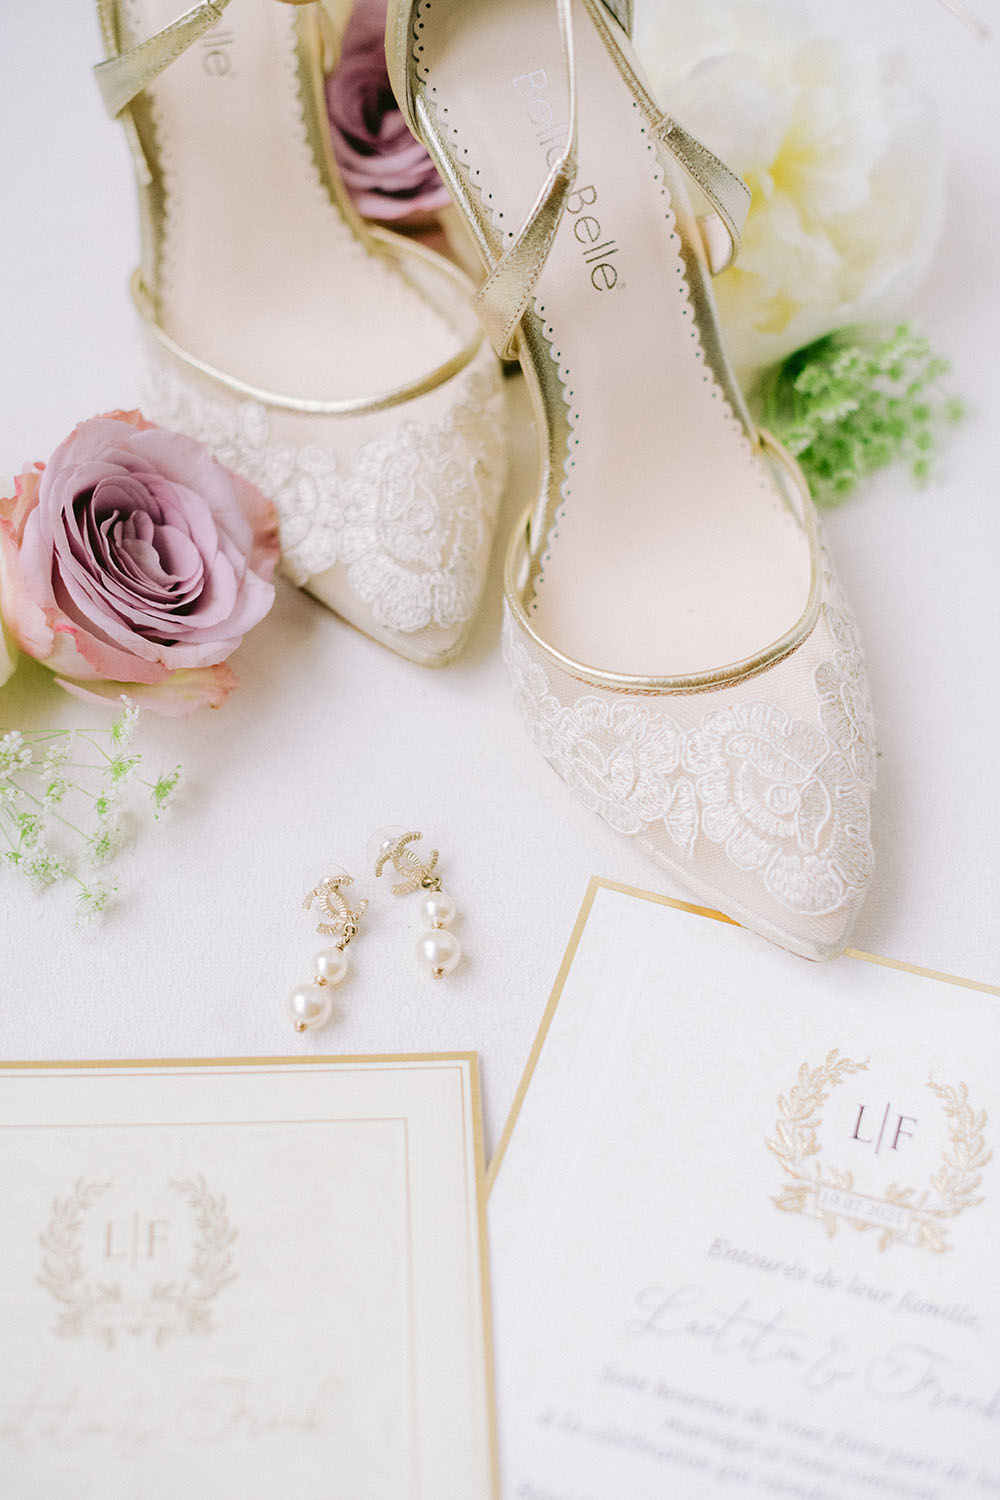 wedding stationnery with wedding shoes bella belle shoes